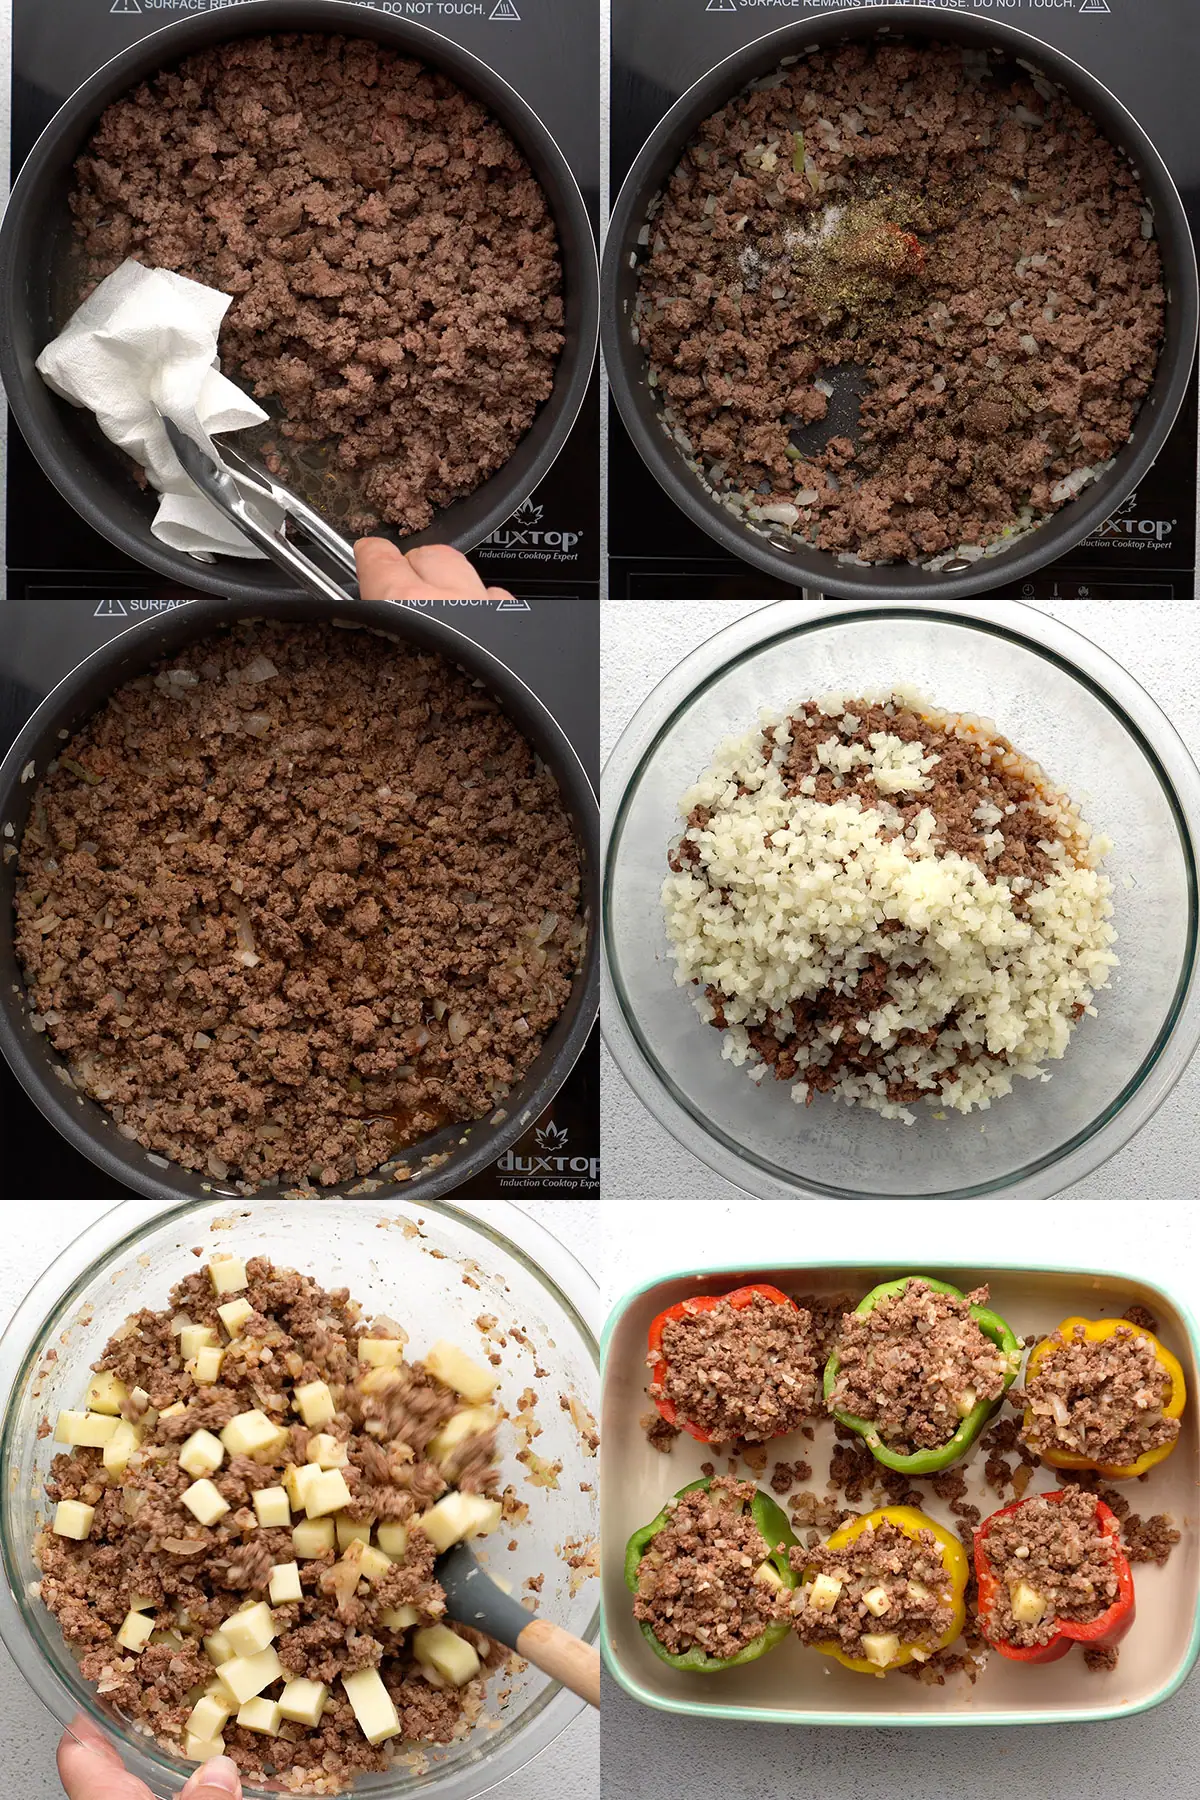 Step by step process photos of making the ground beef filling with vegetables and cheese.  